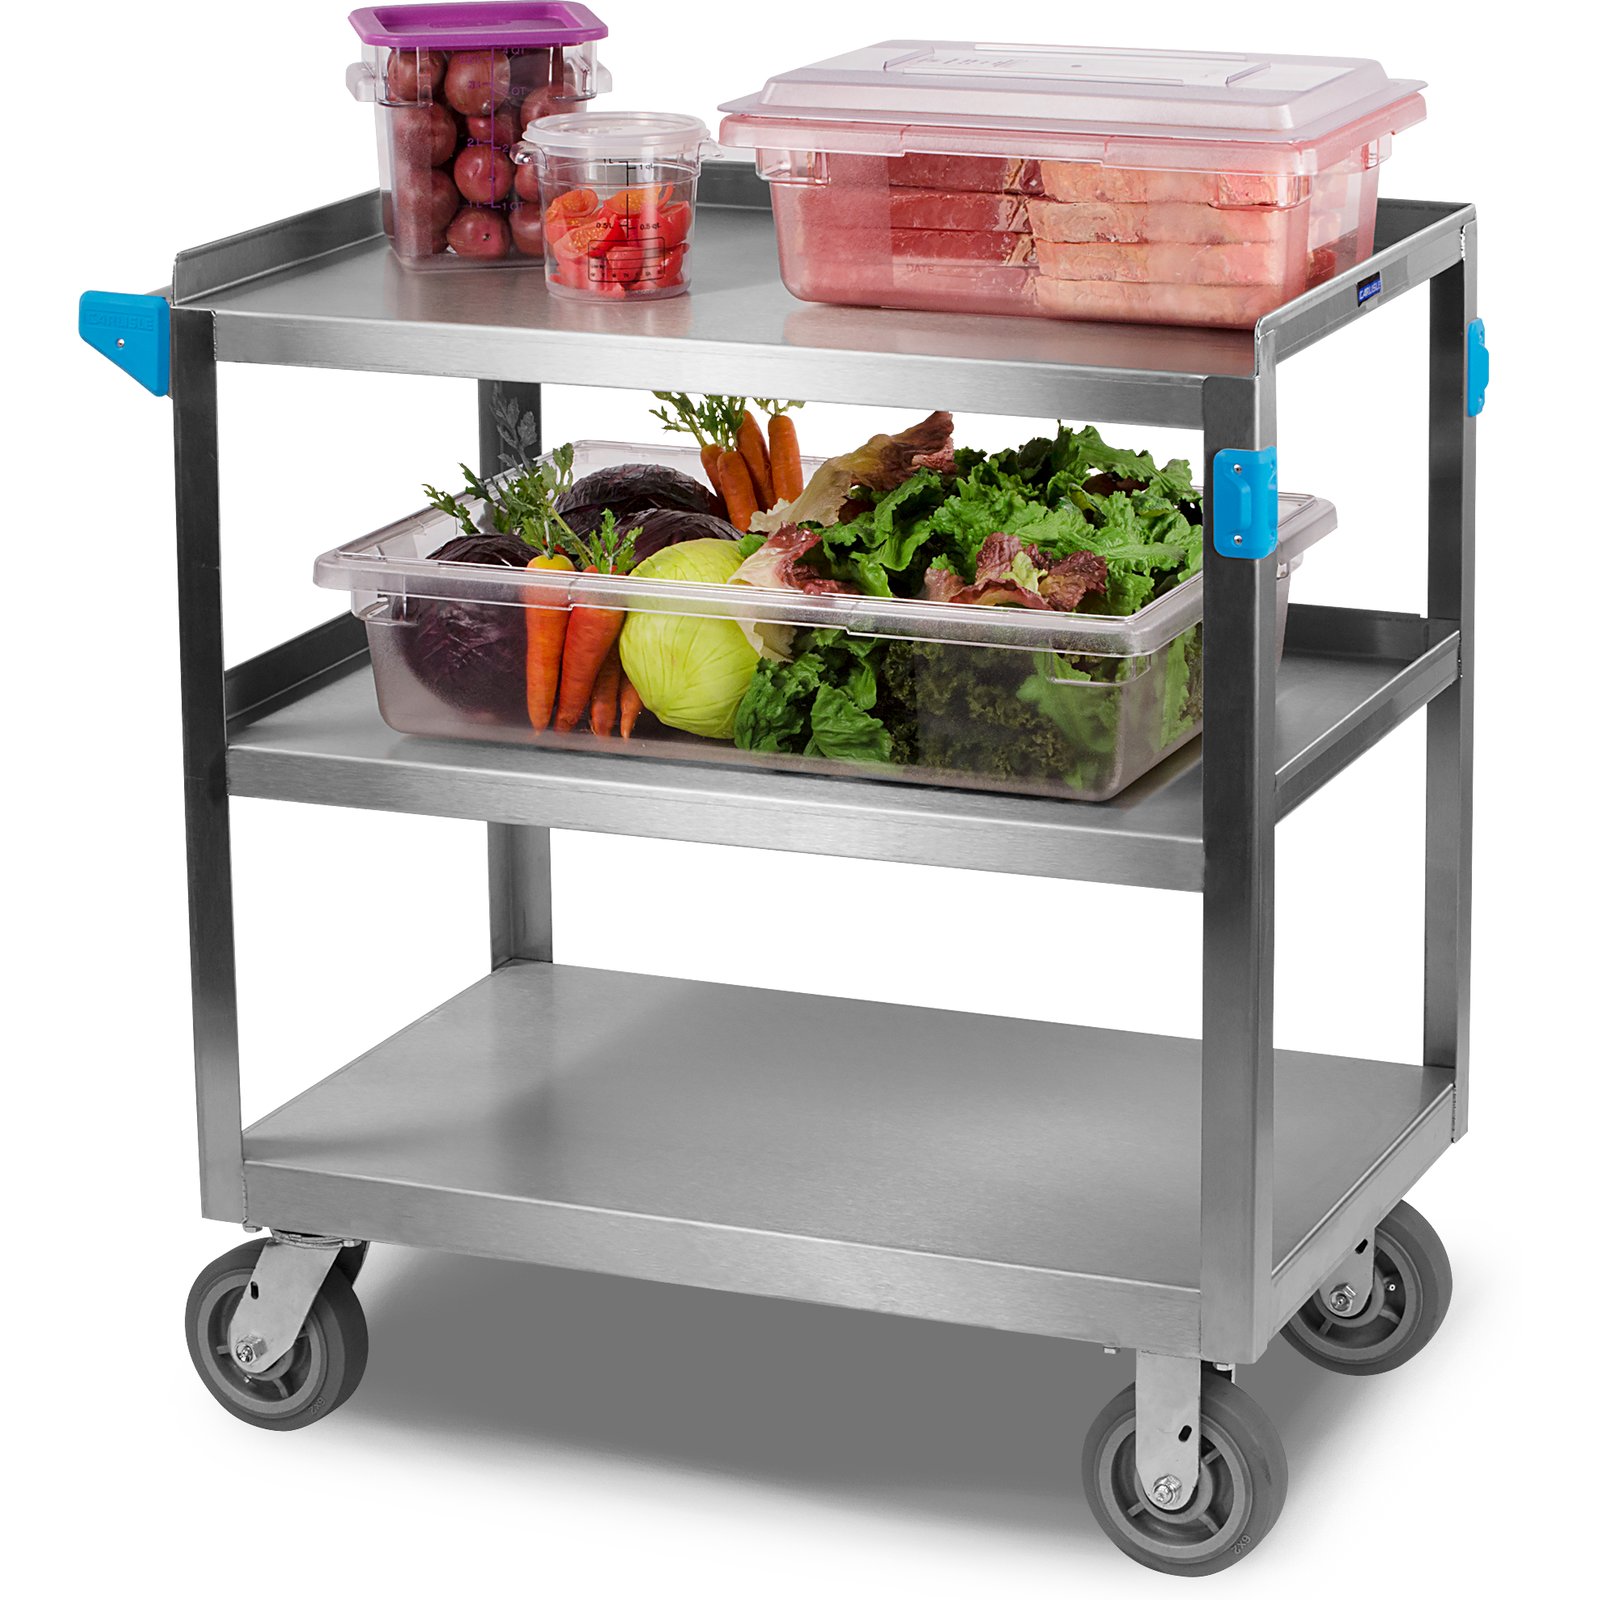 UC7032133 - Stainless Steel 3 Shelf Utility Cart 21 x 33 - Stainless  Steel